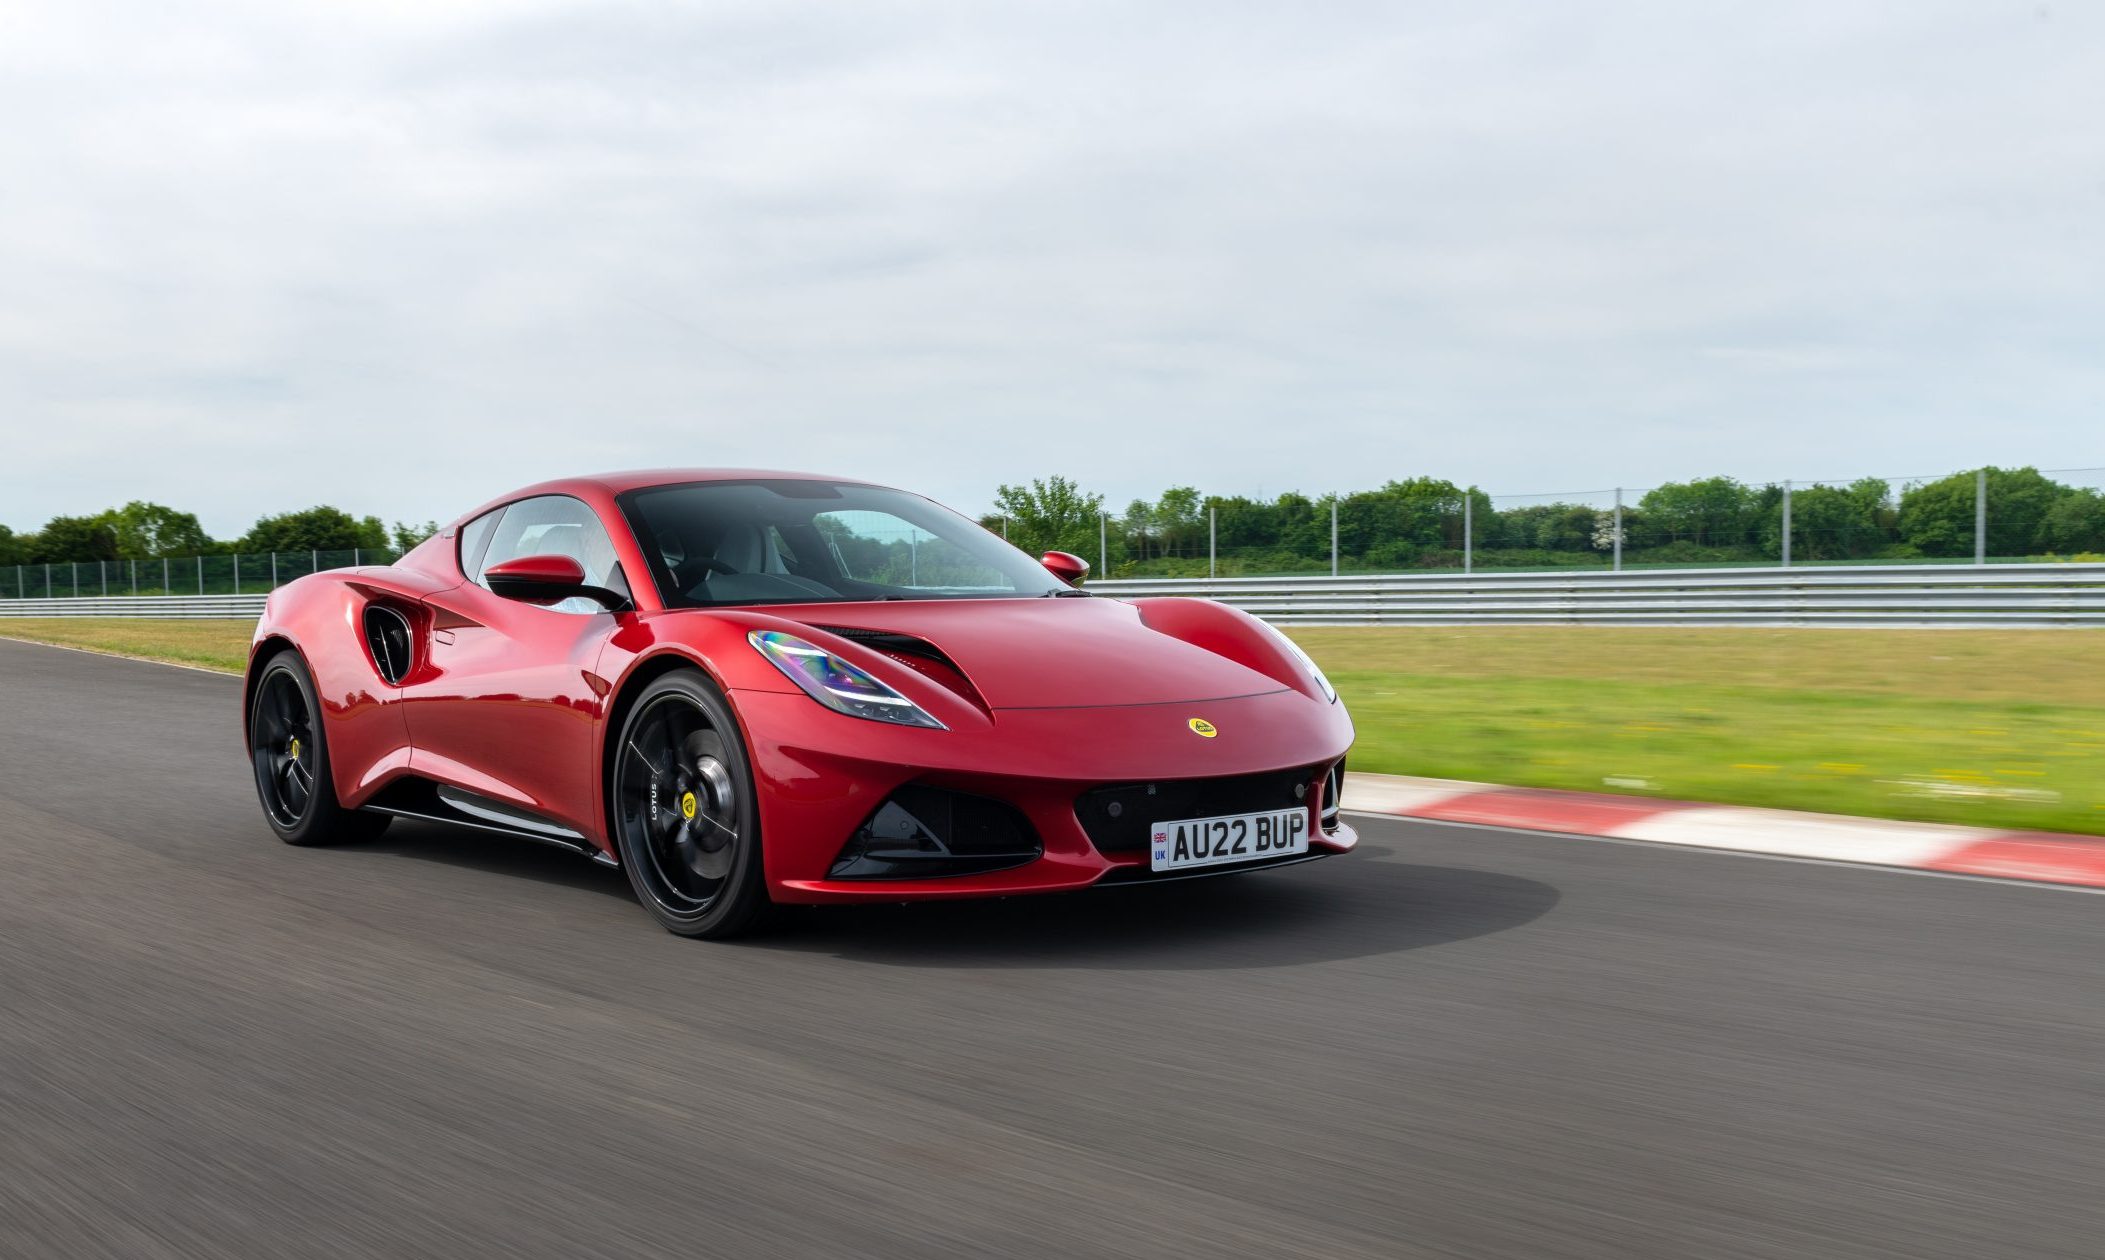 Lotus Emira first drive review: Will the fab four become the famous five?